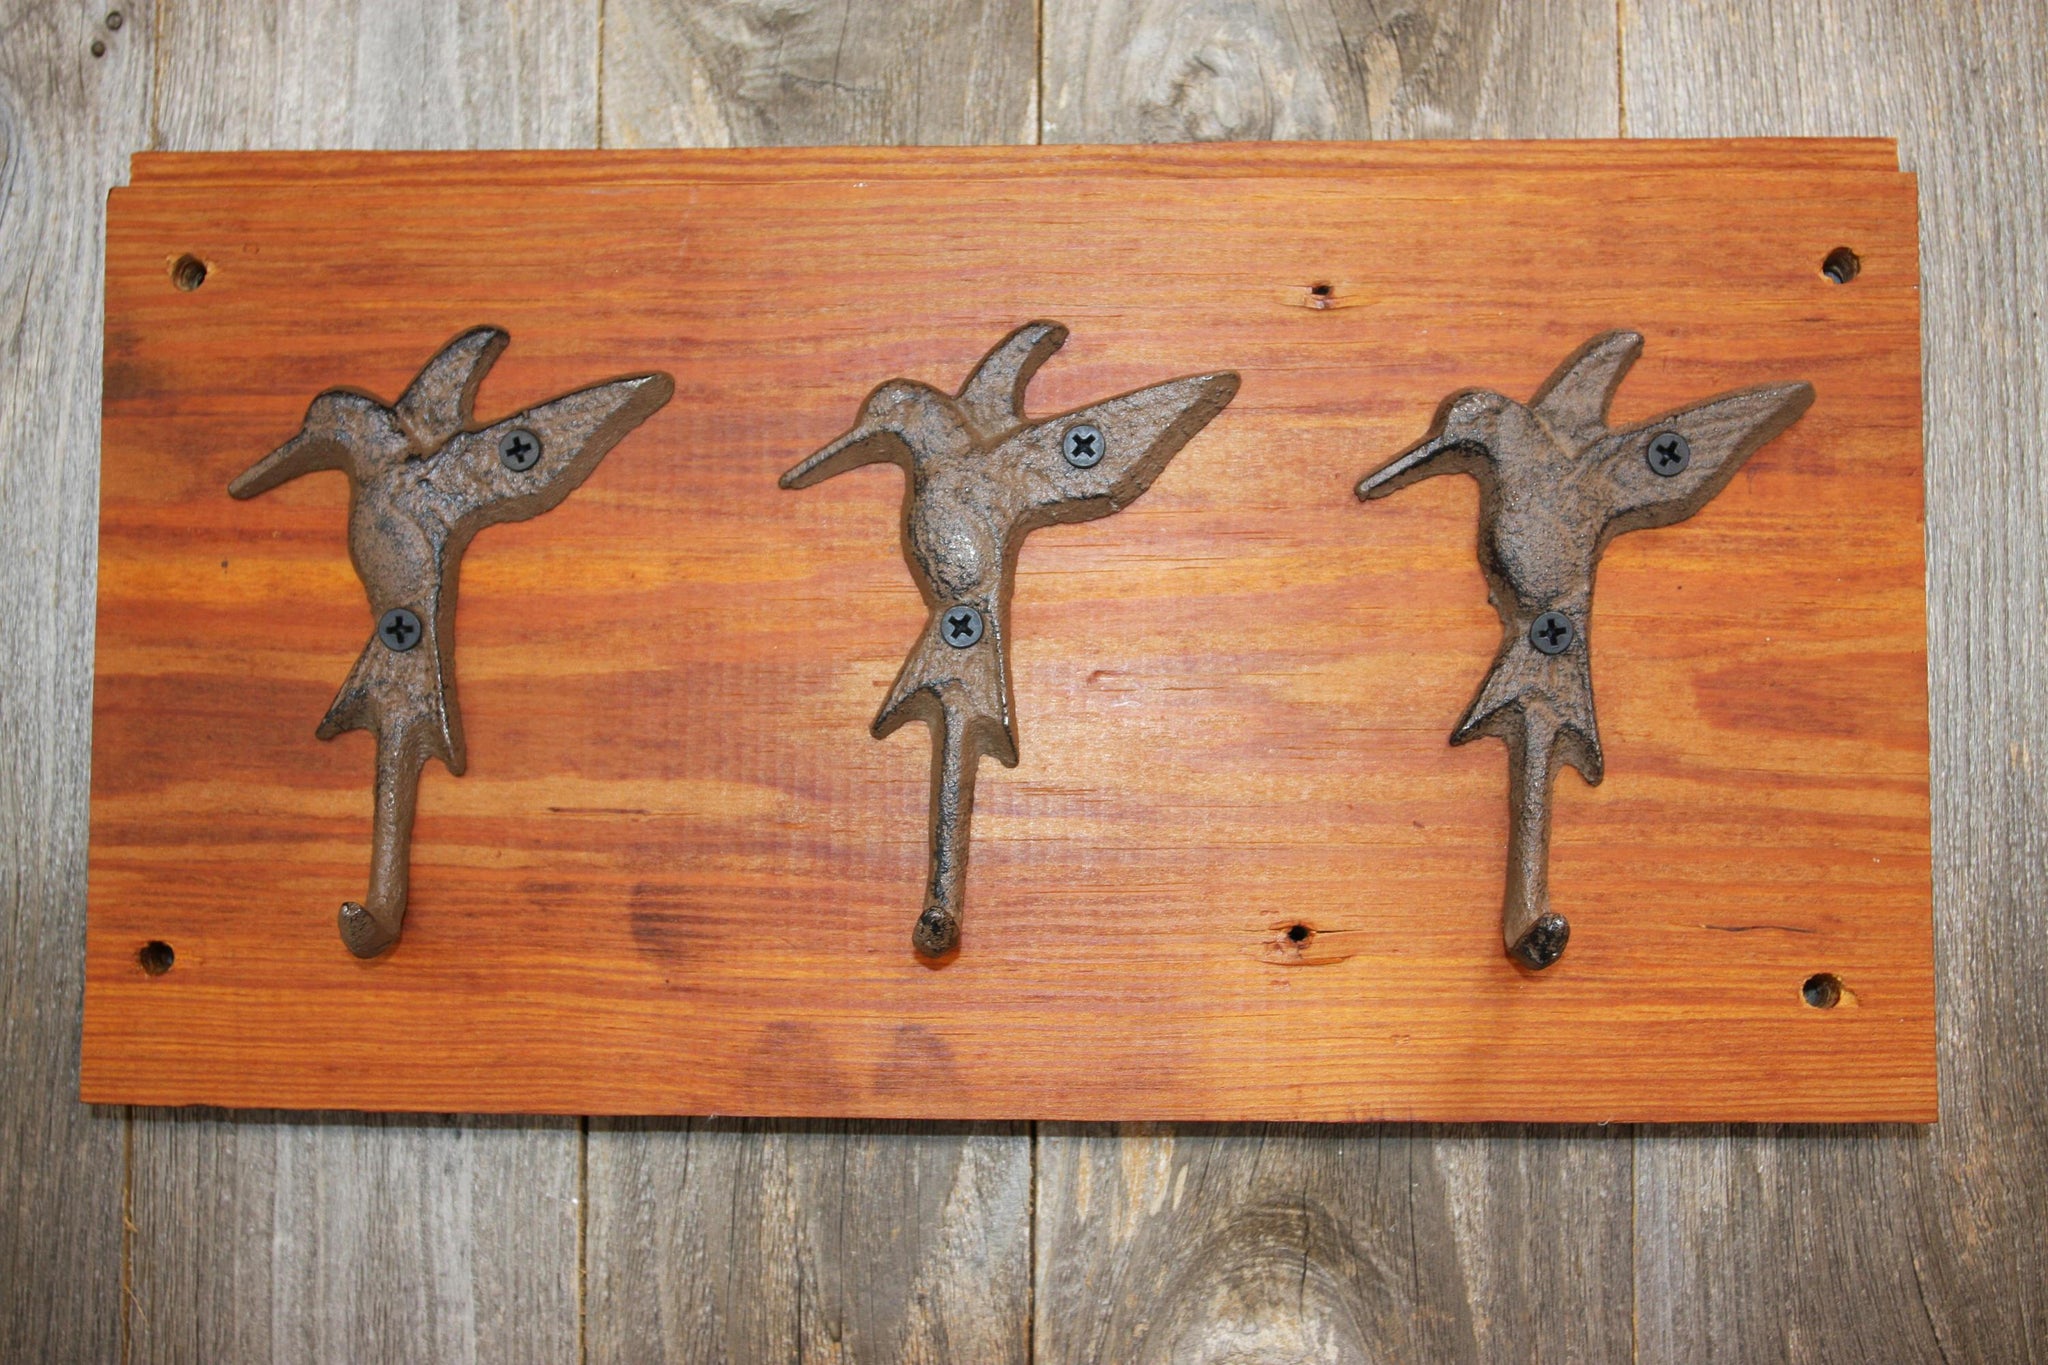 Country Cottage Bath Towel Hooks Hummingbird Garden Design, Handmade in USA,  Reclaimed 100 Year Old Wood, The Country Hookers, CH-7